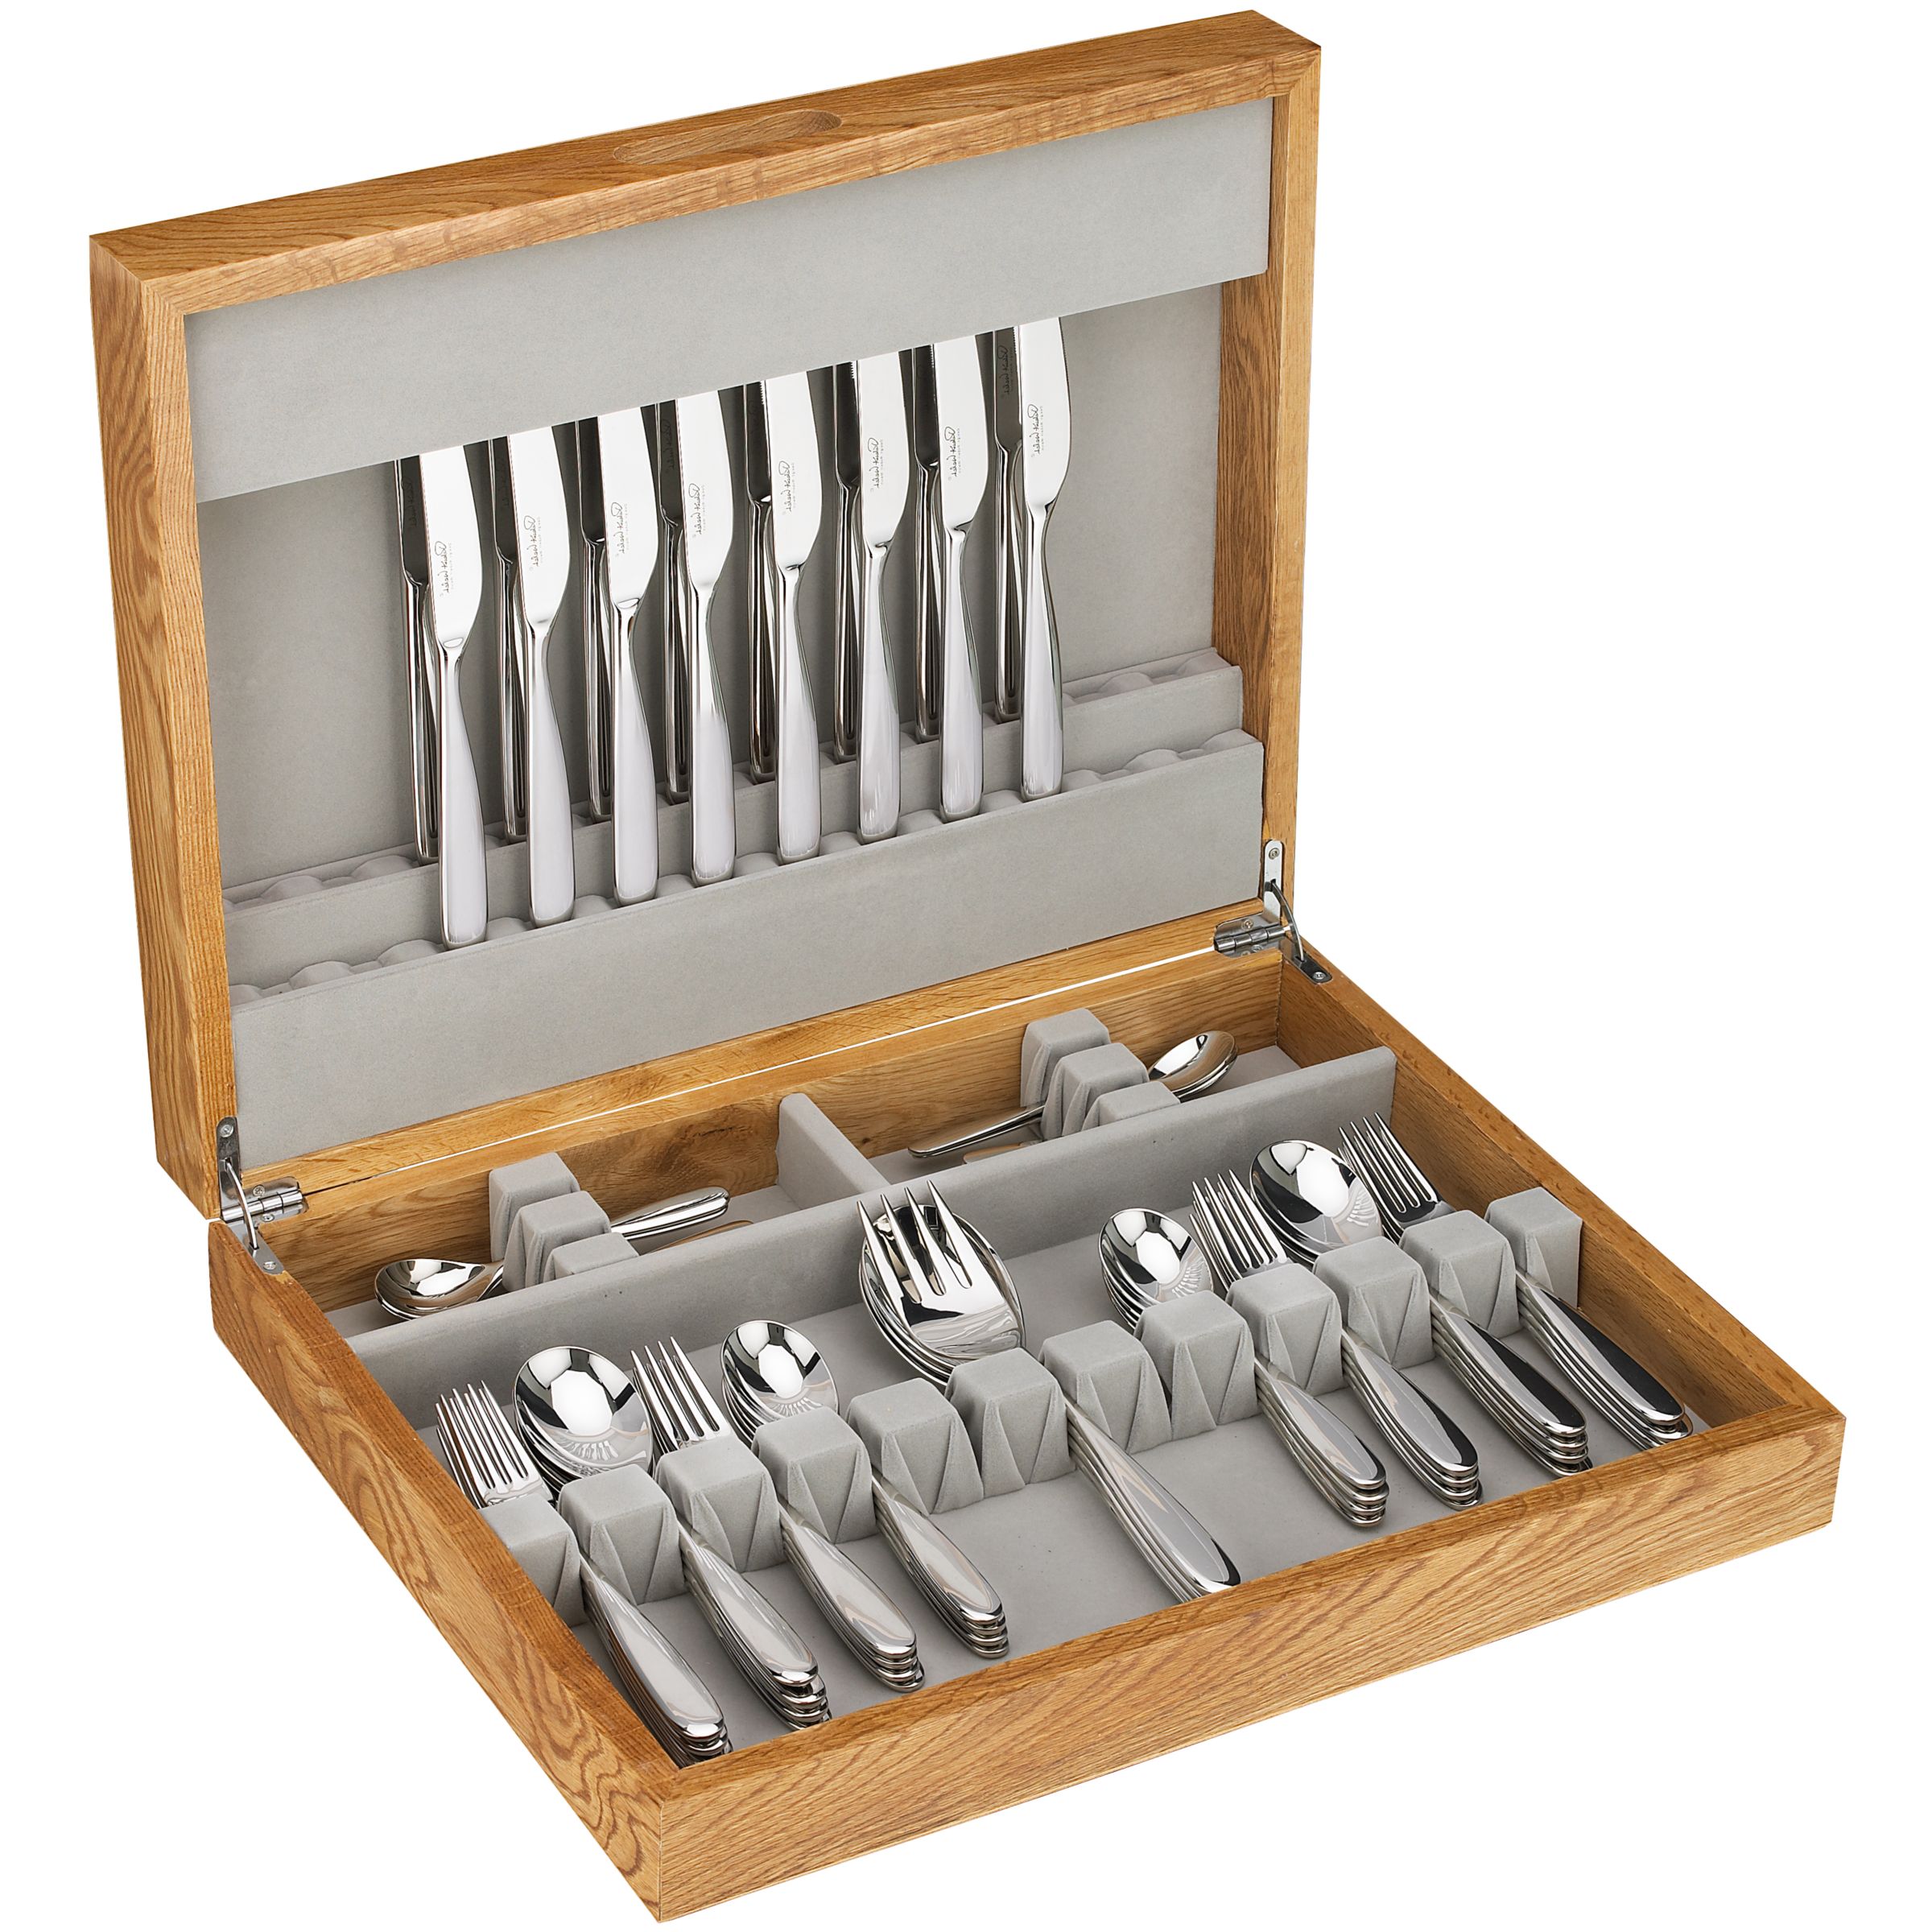 Robert Welch Stanton Cutlery Set 60 Piece Review Compare Prices